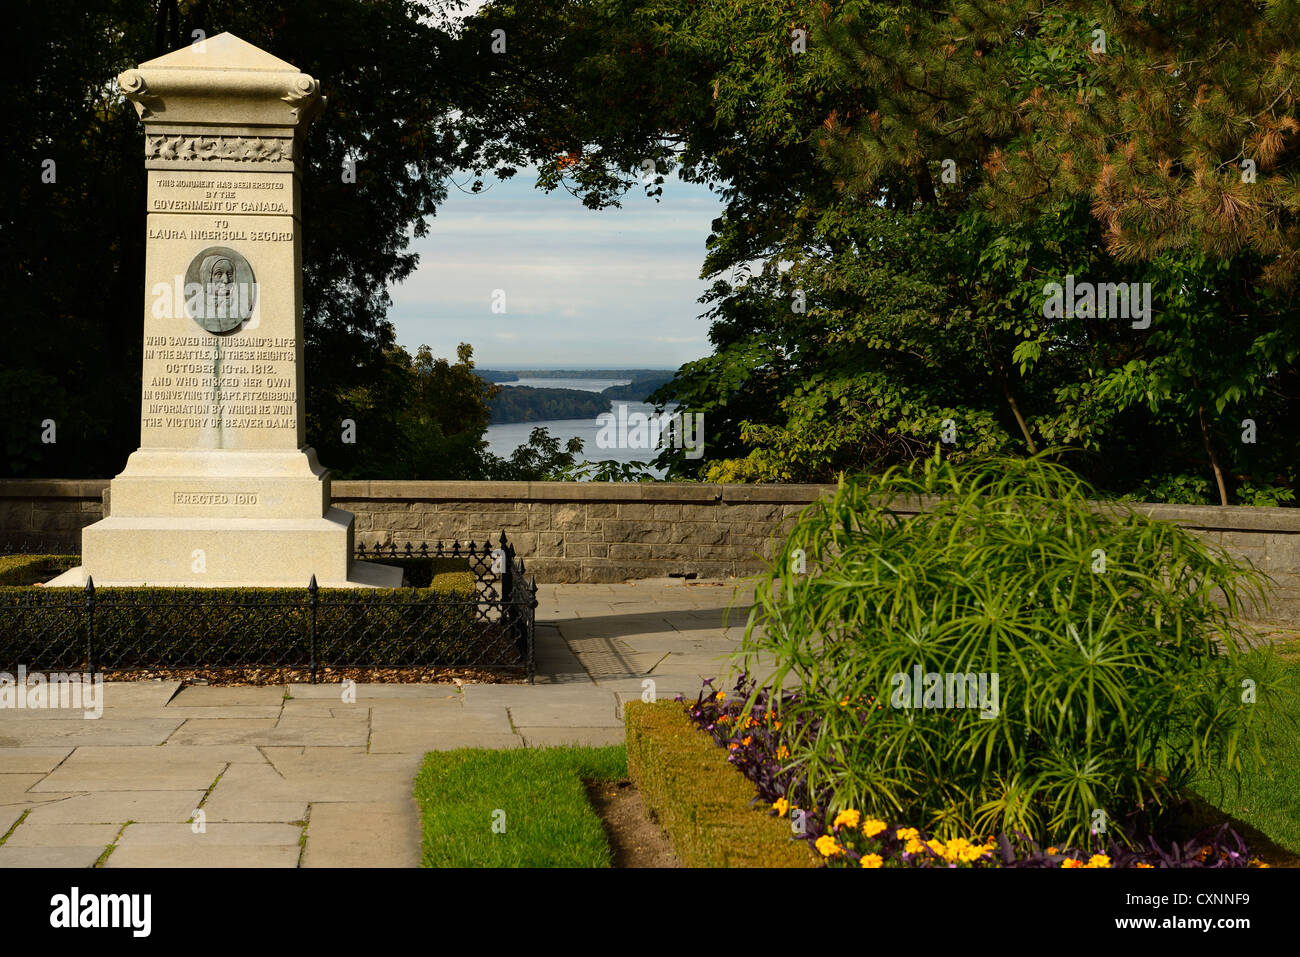 Monument at Queenston Heights Niagara river Ontario Canada to heroine Laura Secord in War of 1812 with the United States Stock Photo